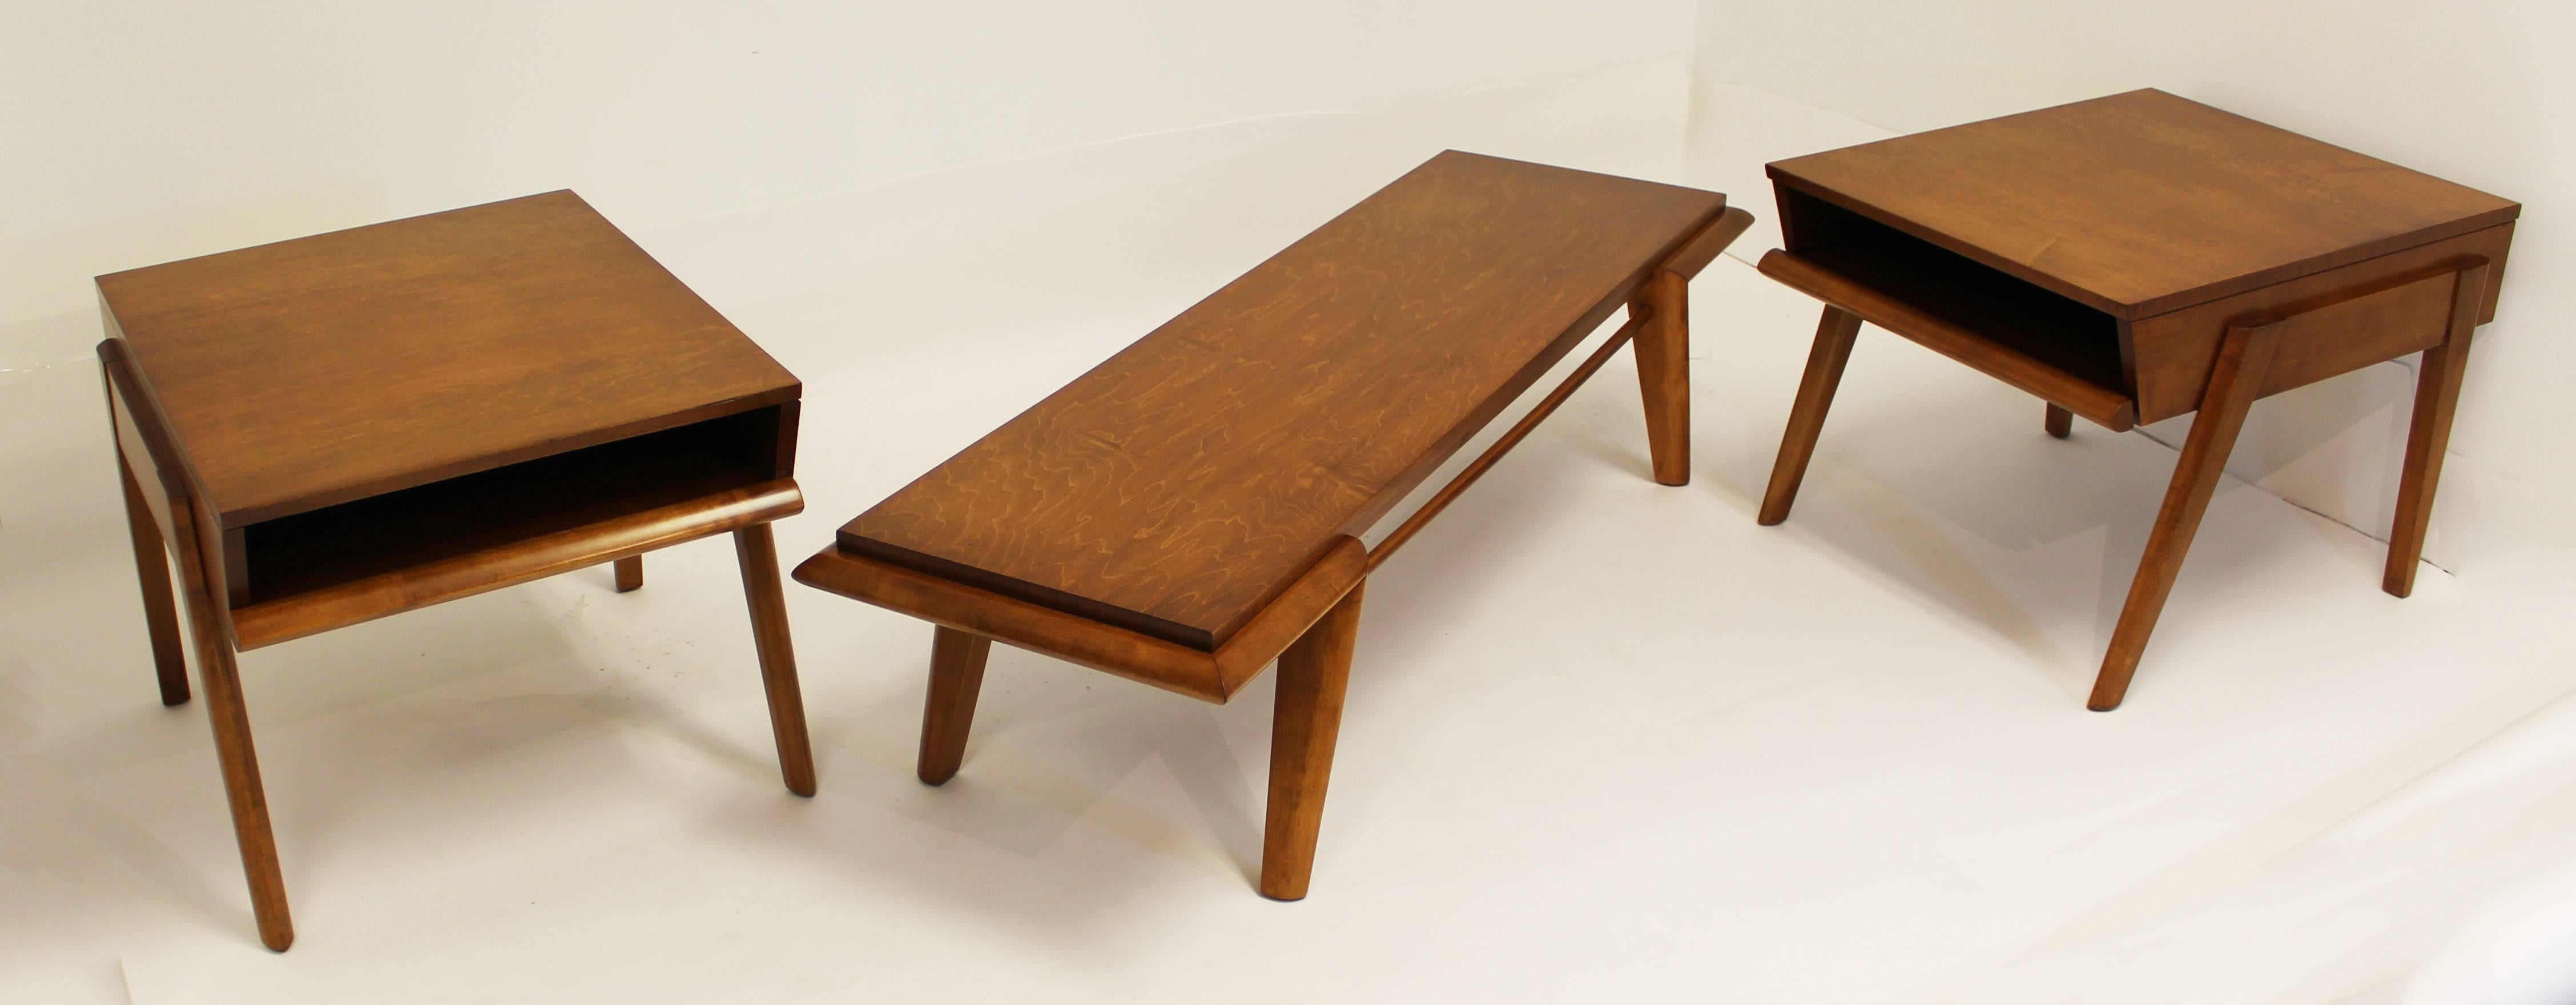 Coffee and end table set by John Keal for Brown Saltman, circa 1953. The perfectly angled hard rock maple has been professionally refinished and is in excellent condition. Personally signed by John Keal. The dimensions of the coffee table are 59.5